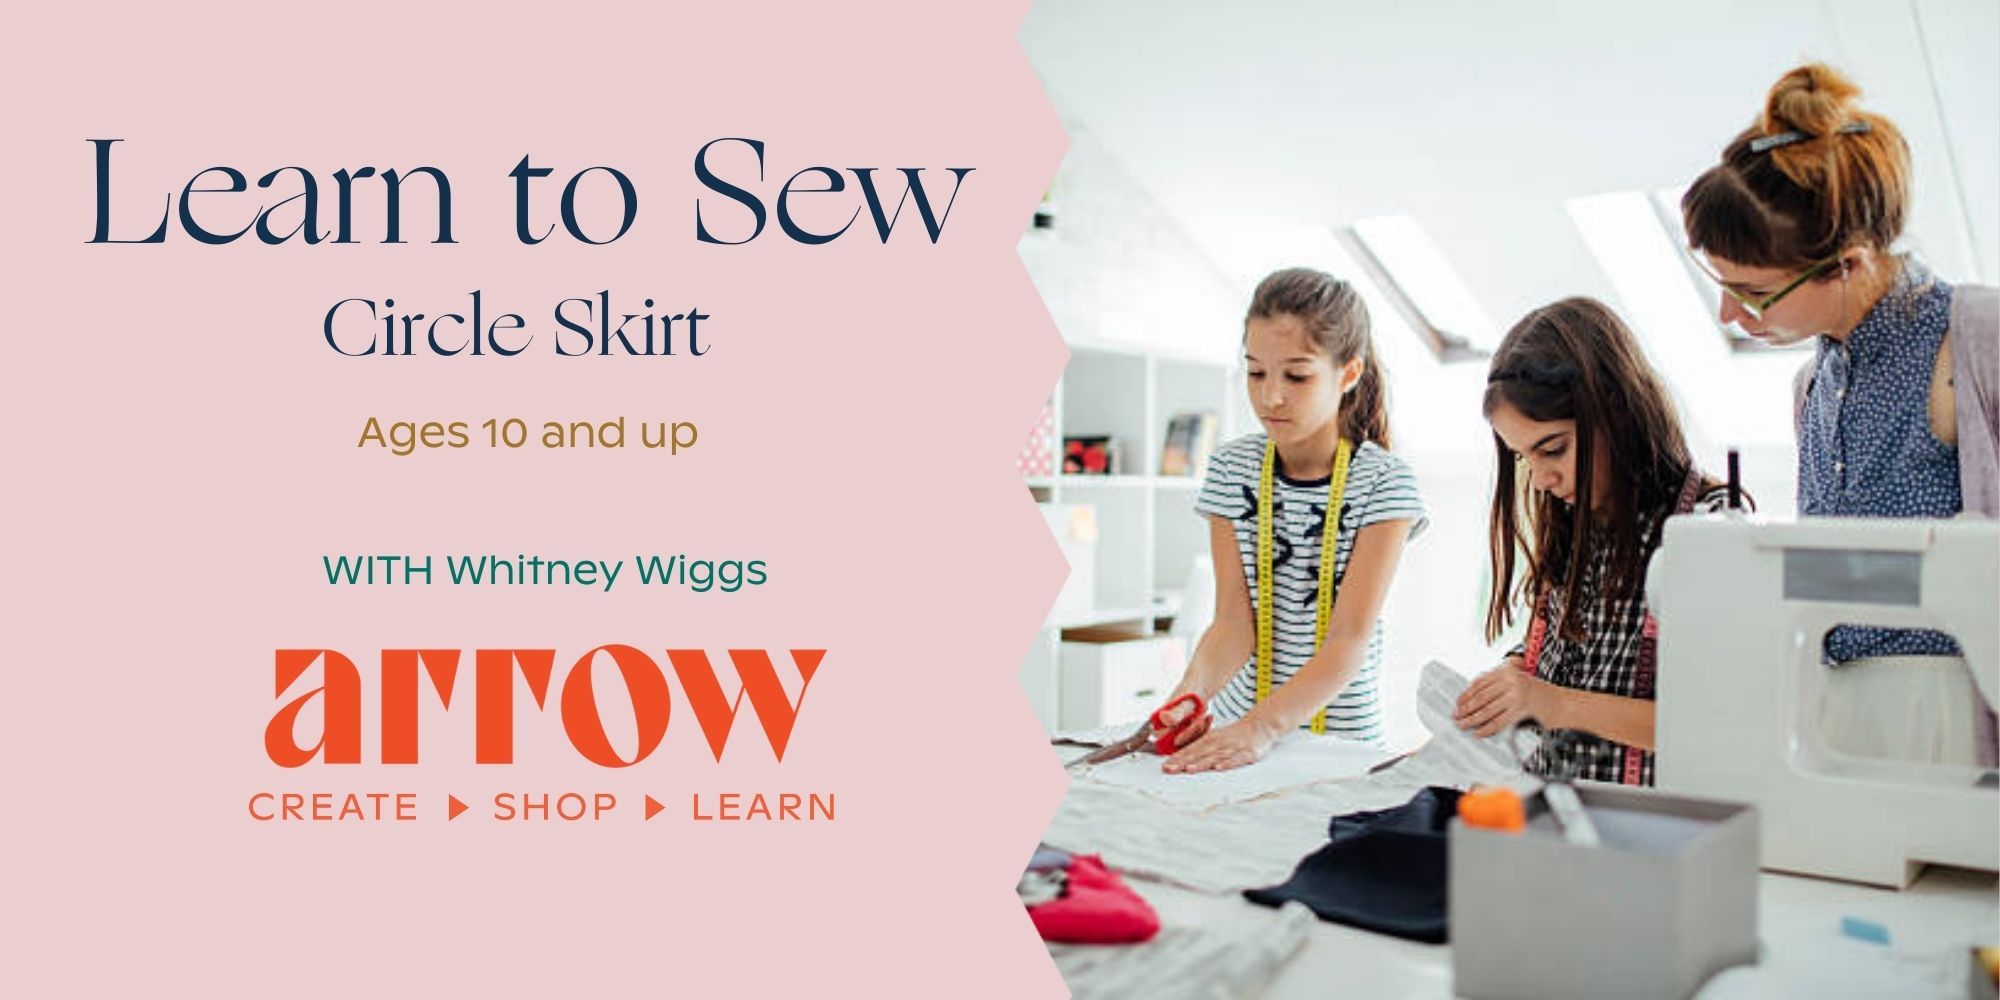 Learn to Sew: Circle Skirt! promotional image